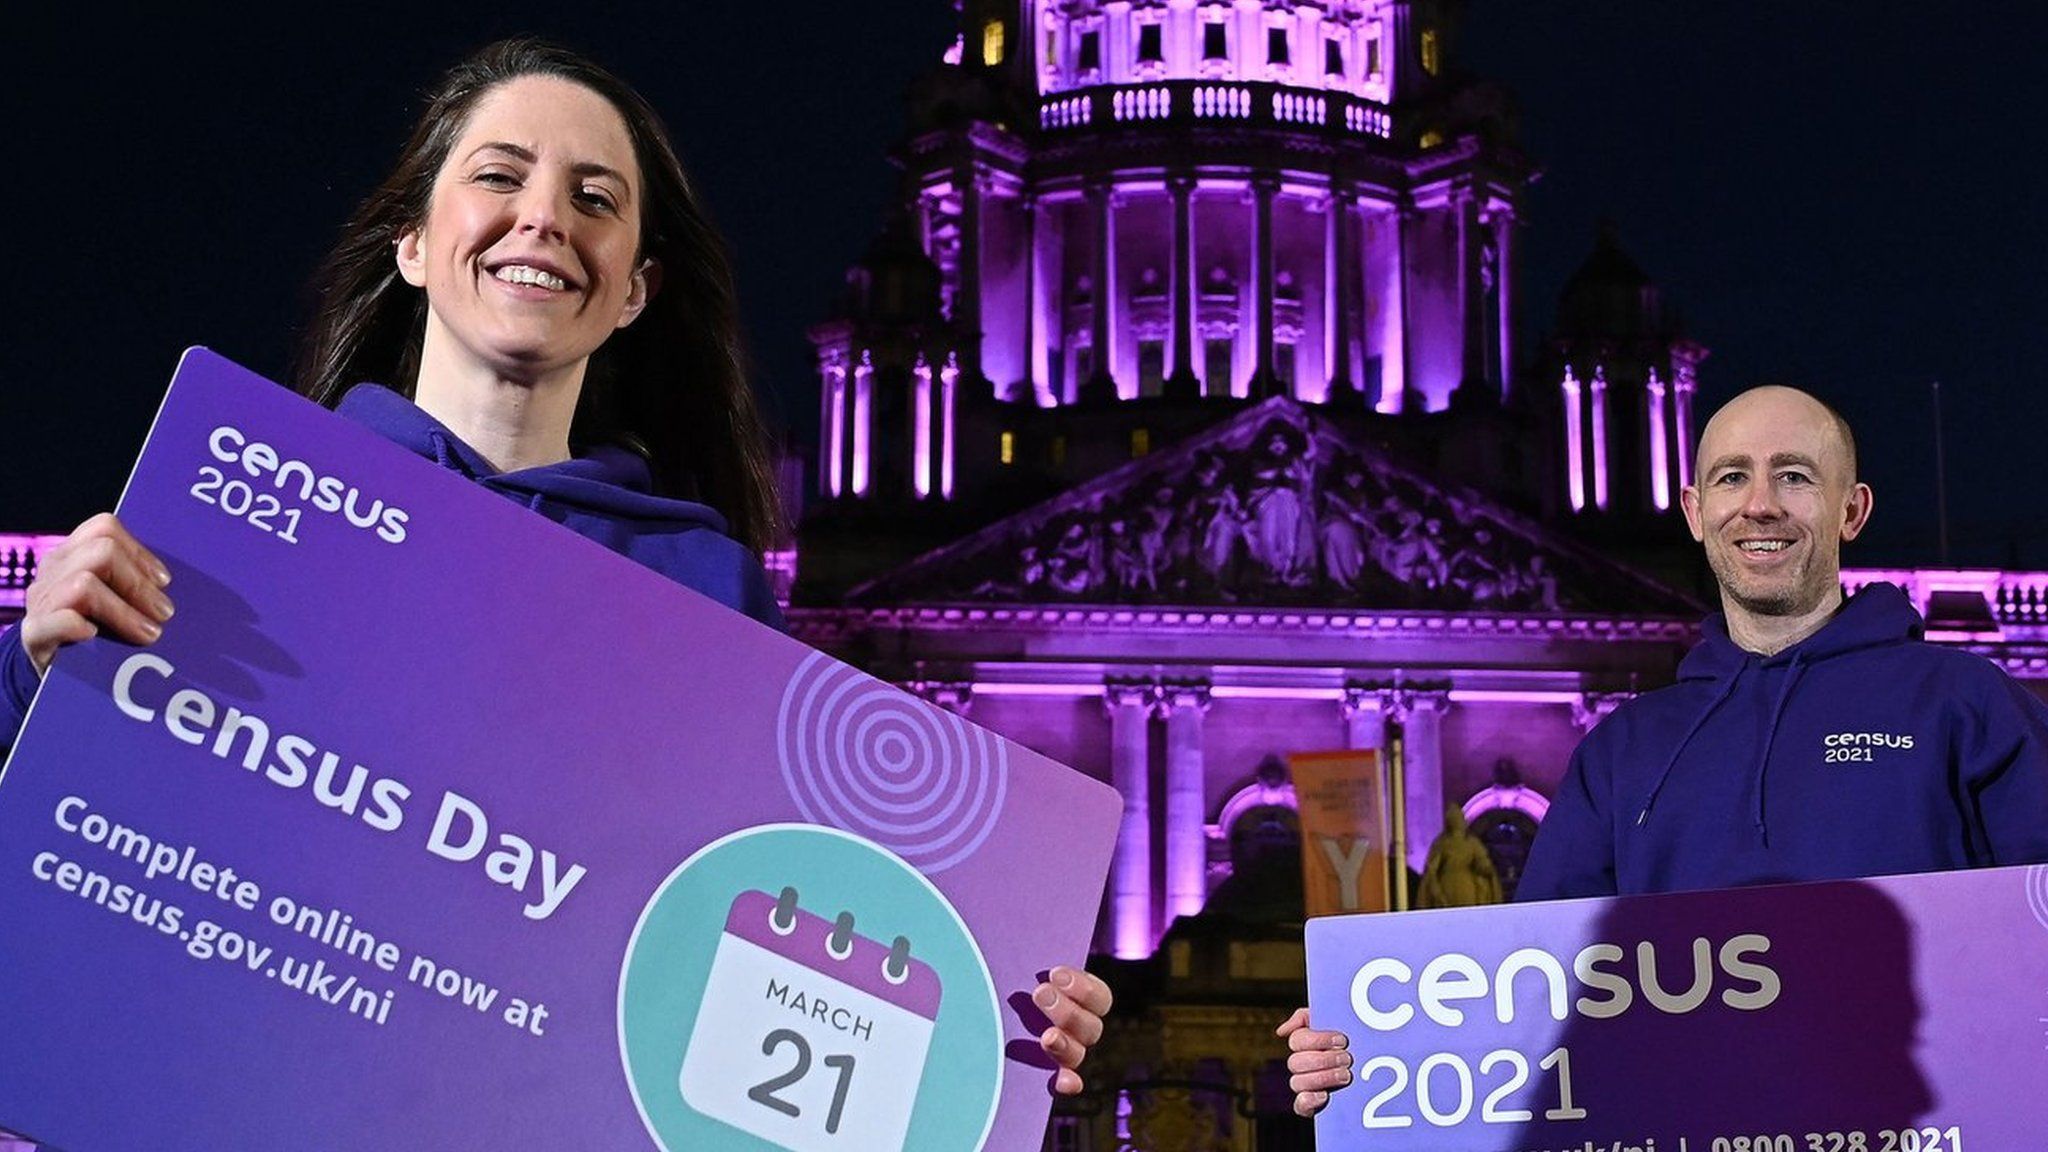 Shauna Dunlop and Conor McKiernan posing in front of Belfast City Hall to promote the census